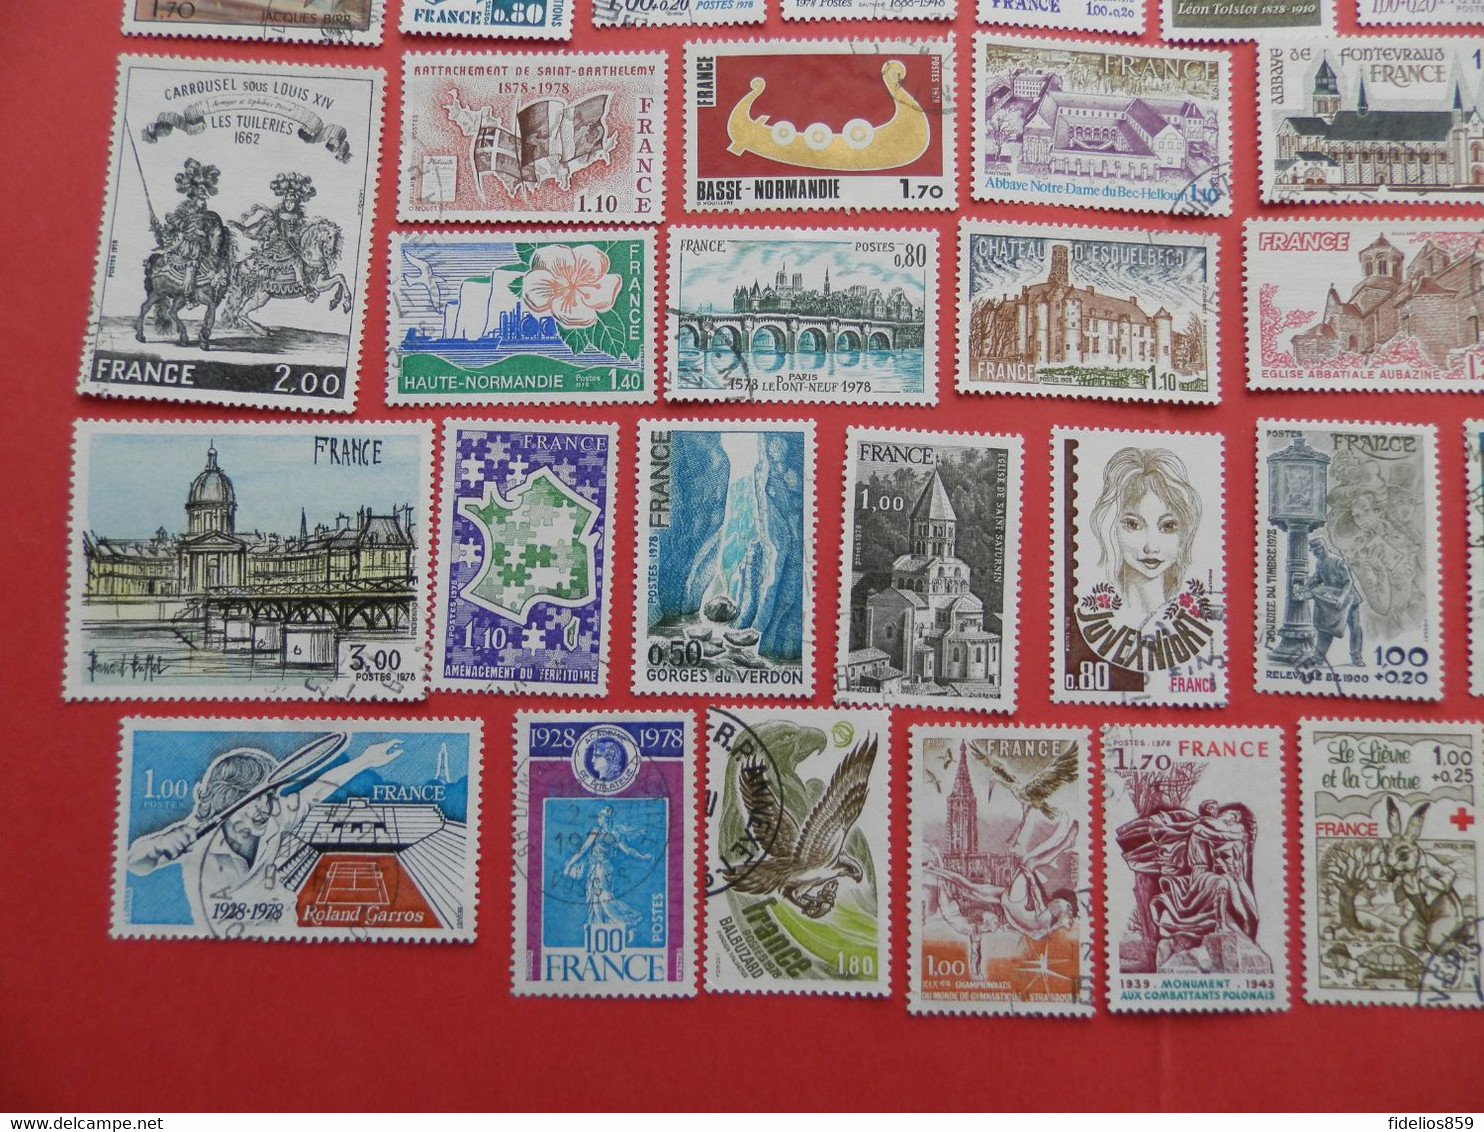 FRANCE OBLITERES LUXE : ANNEE COMPLETE 1978 SOIT 69 TIMBRES POSTE DIFFERENTS + PA 51 + PREOS 150/57 - 1970-1979